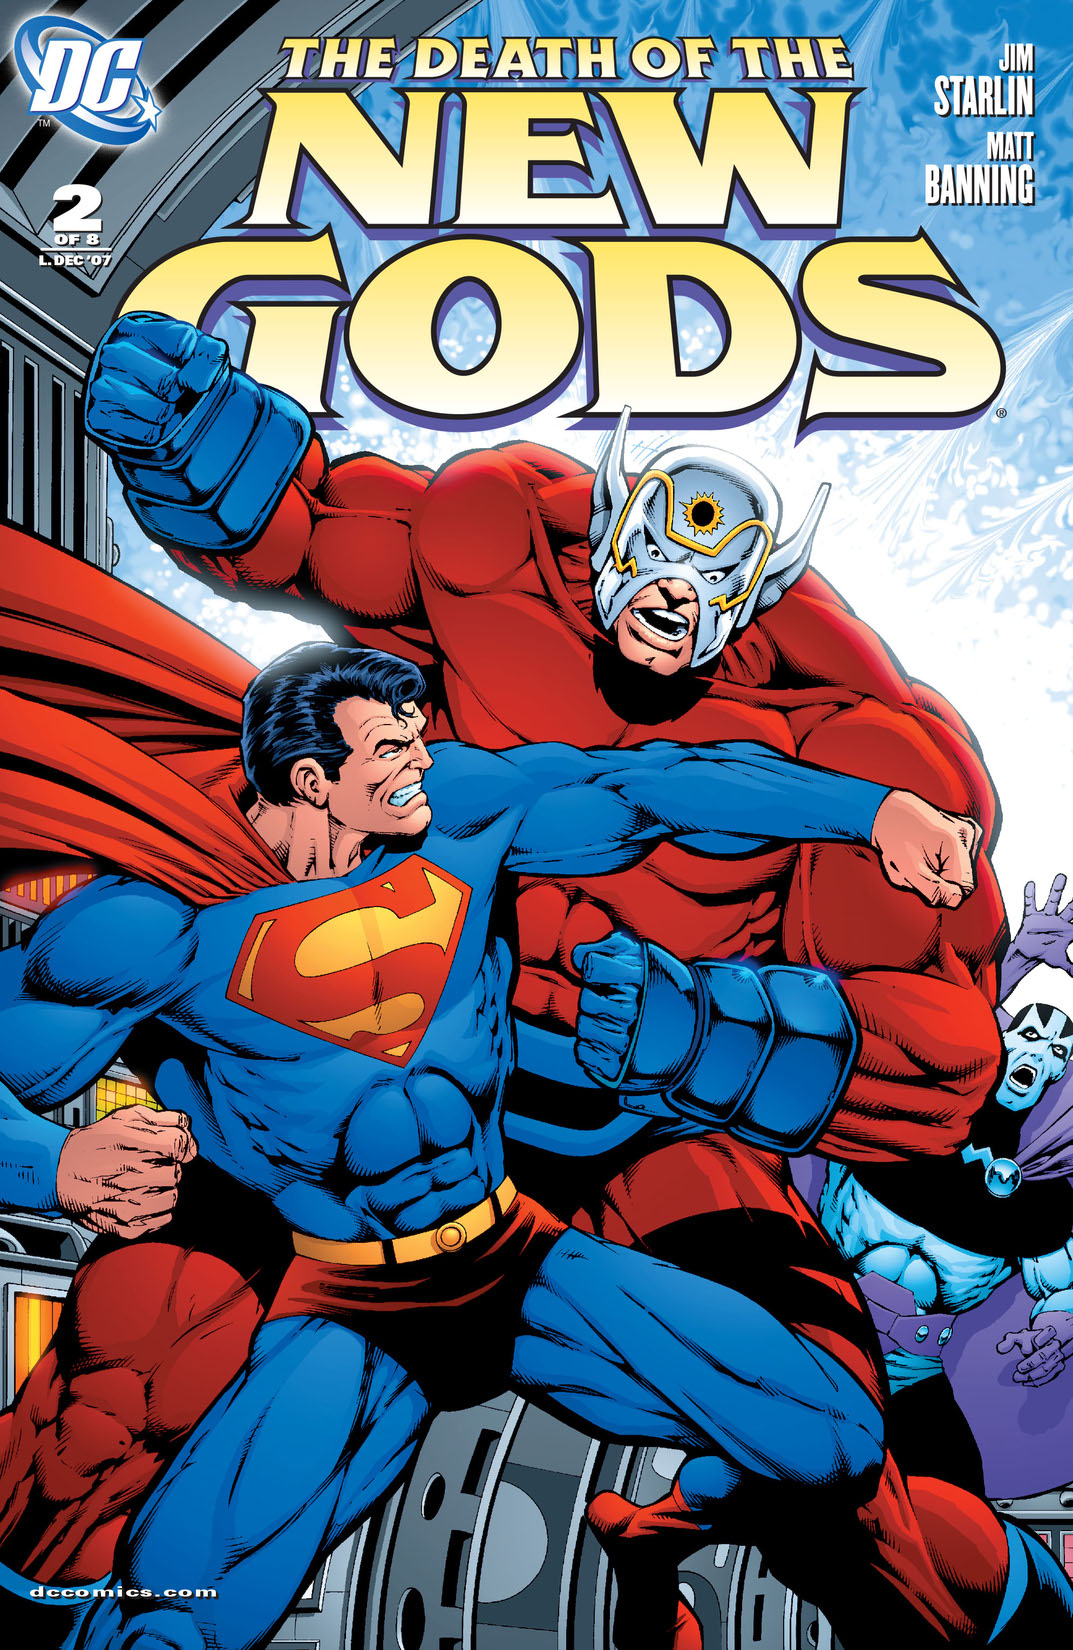 Death of the New Gods #2 preview images